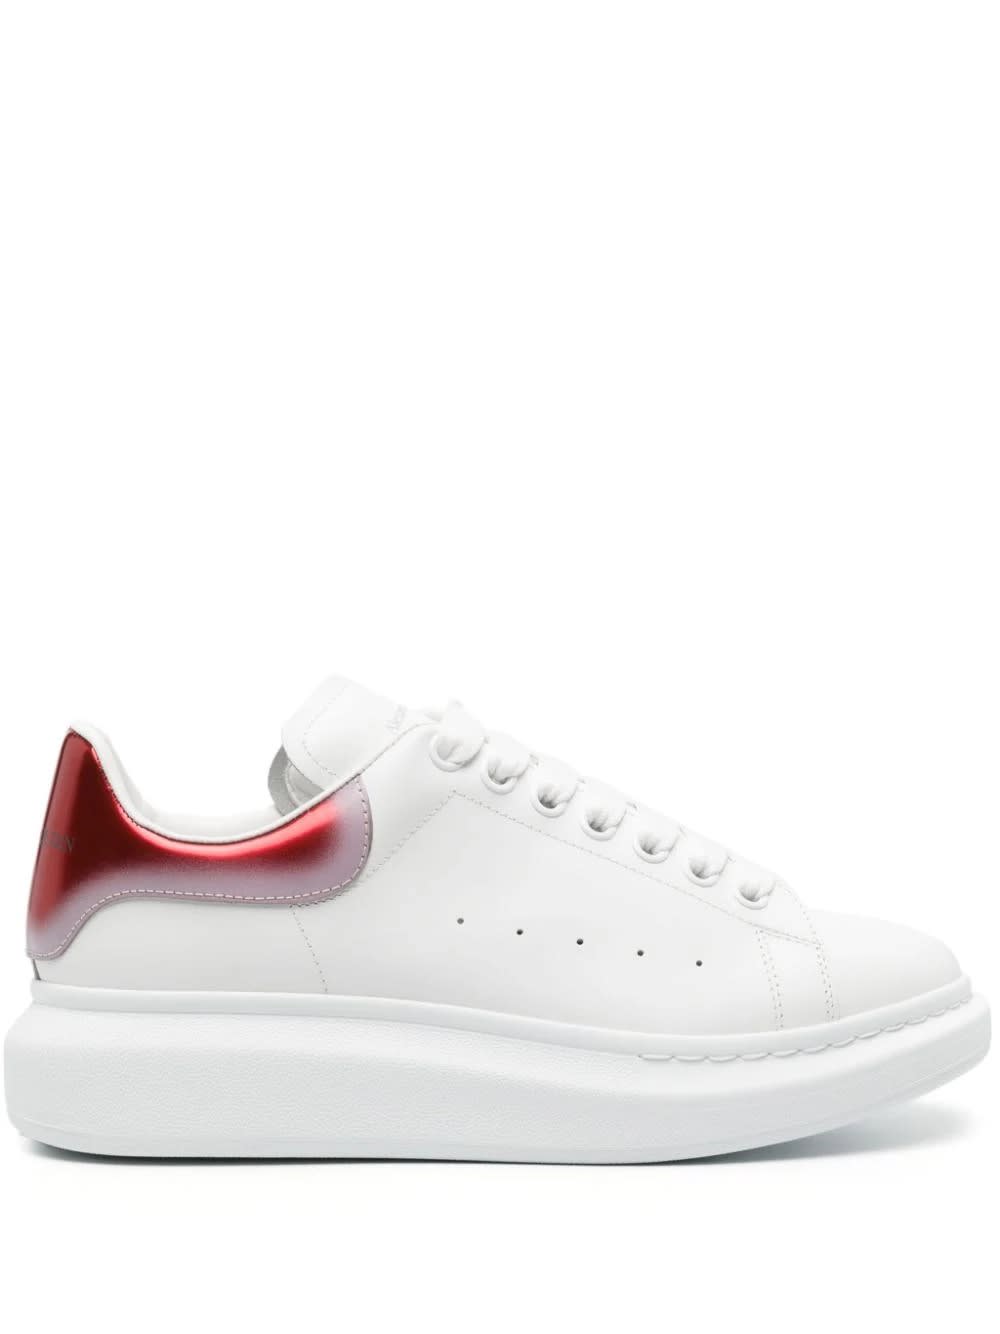 Alexander Mcqueen Oversized Sneakers In White And Red